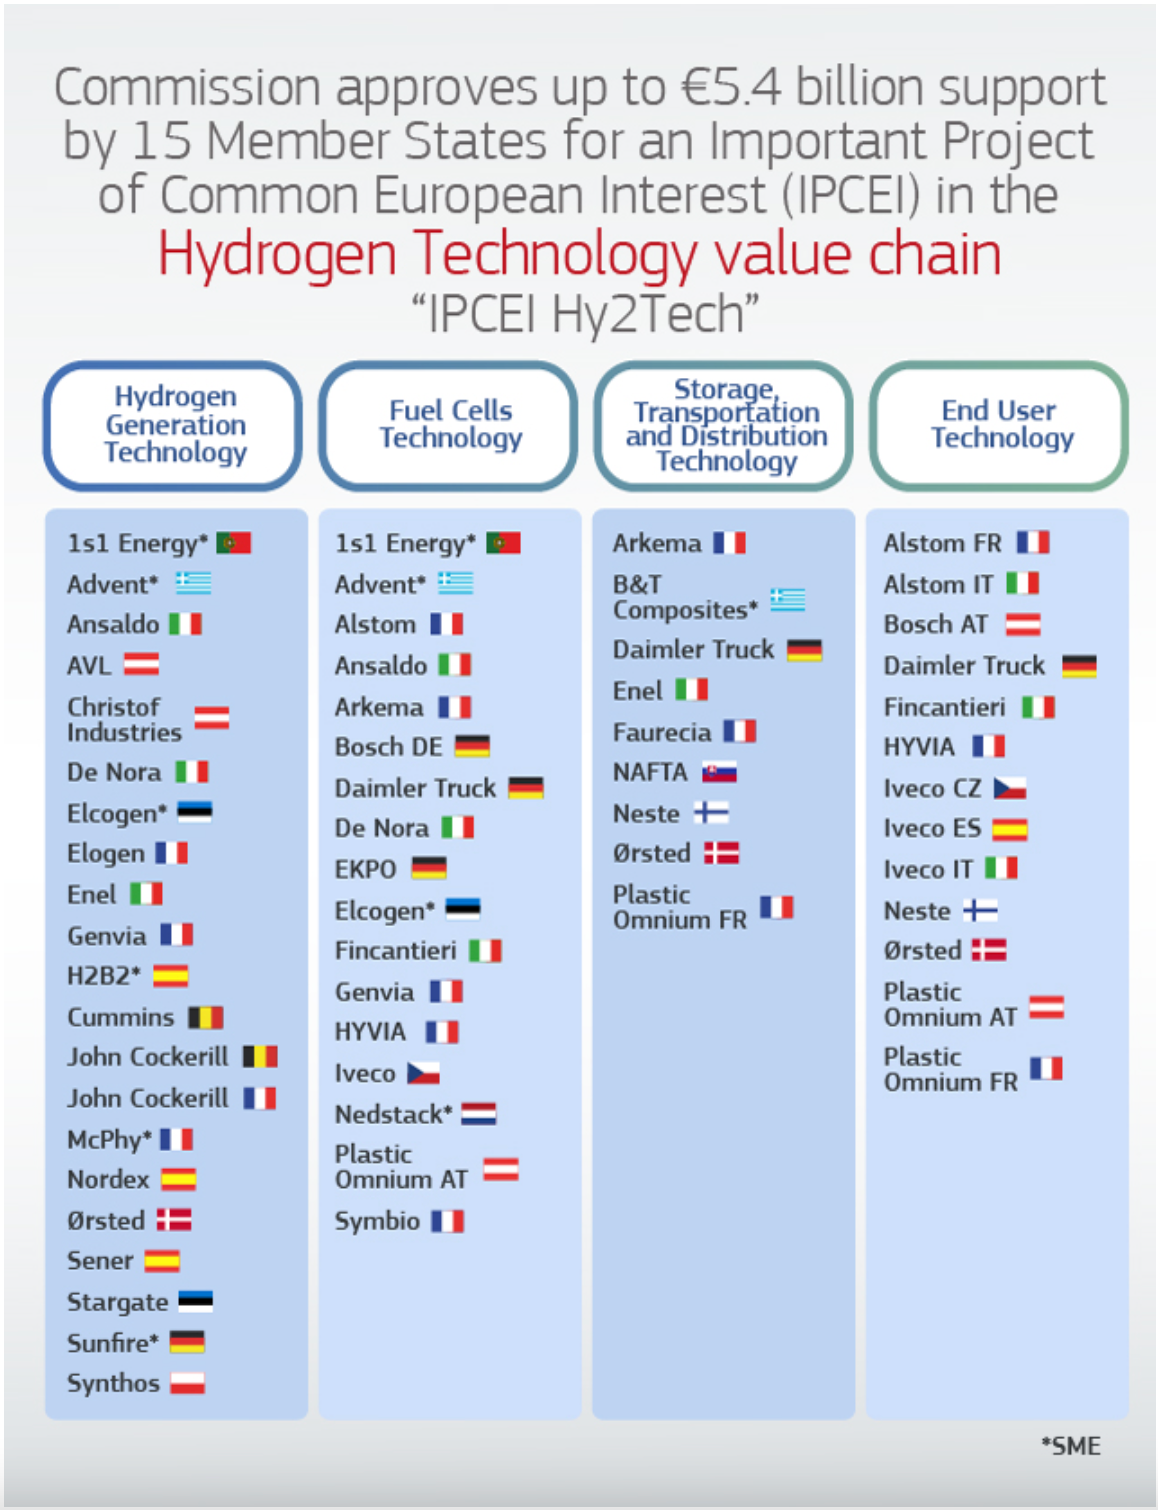 State Aid: Commission approves up to €5.4 billion of public support by fifteen Member States for an Important Project of Common European Interest in the hydrogen technology value chain